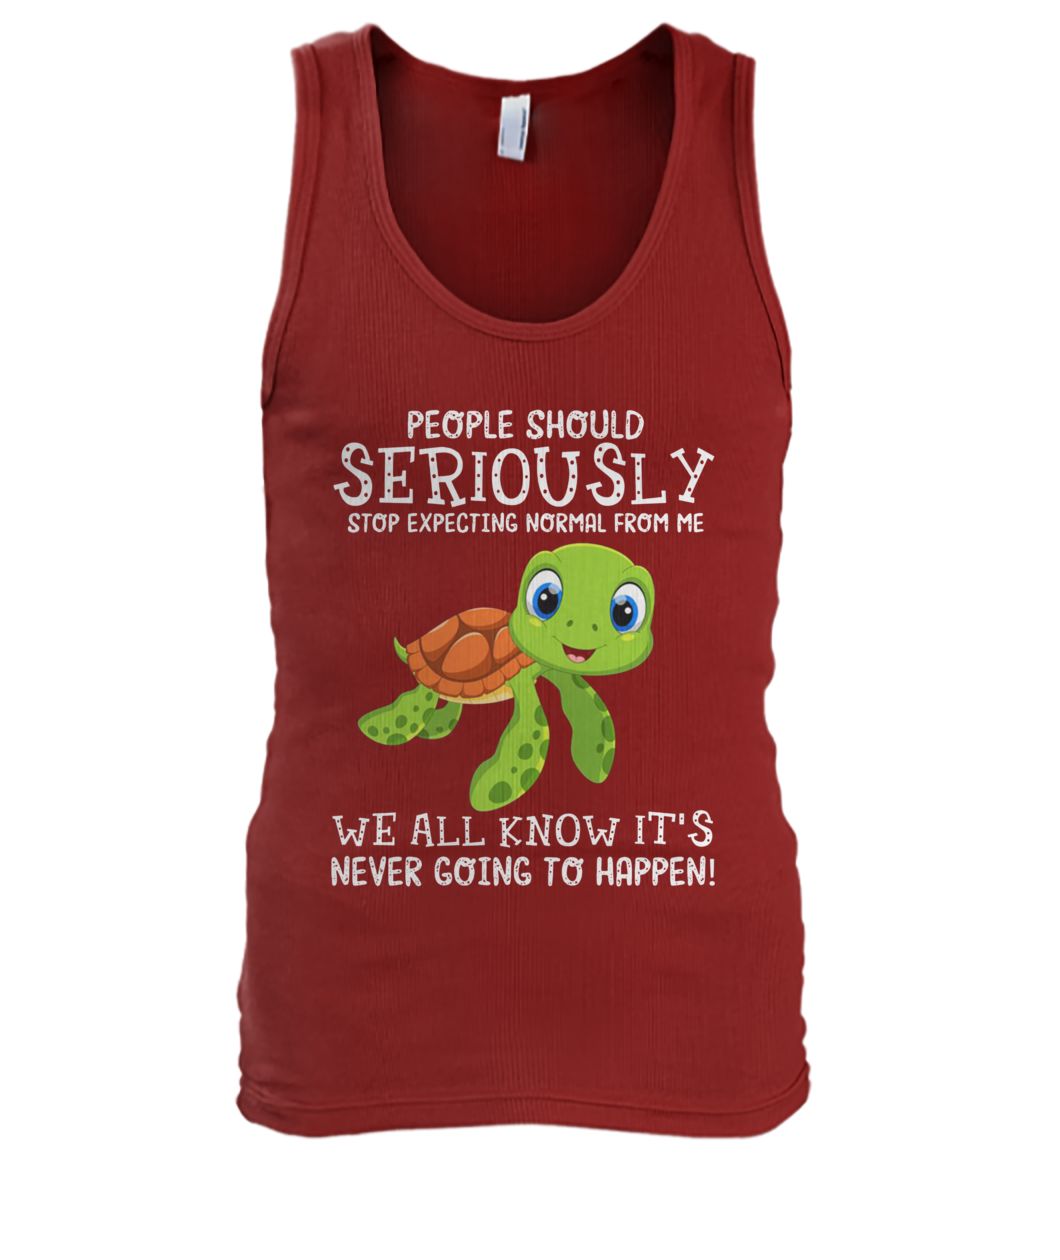 People should seriously stop expecting normal from me baby turtle men's tank top